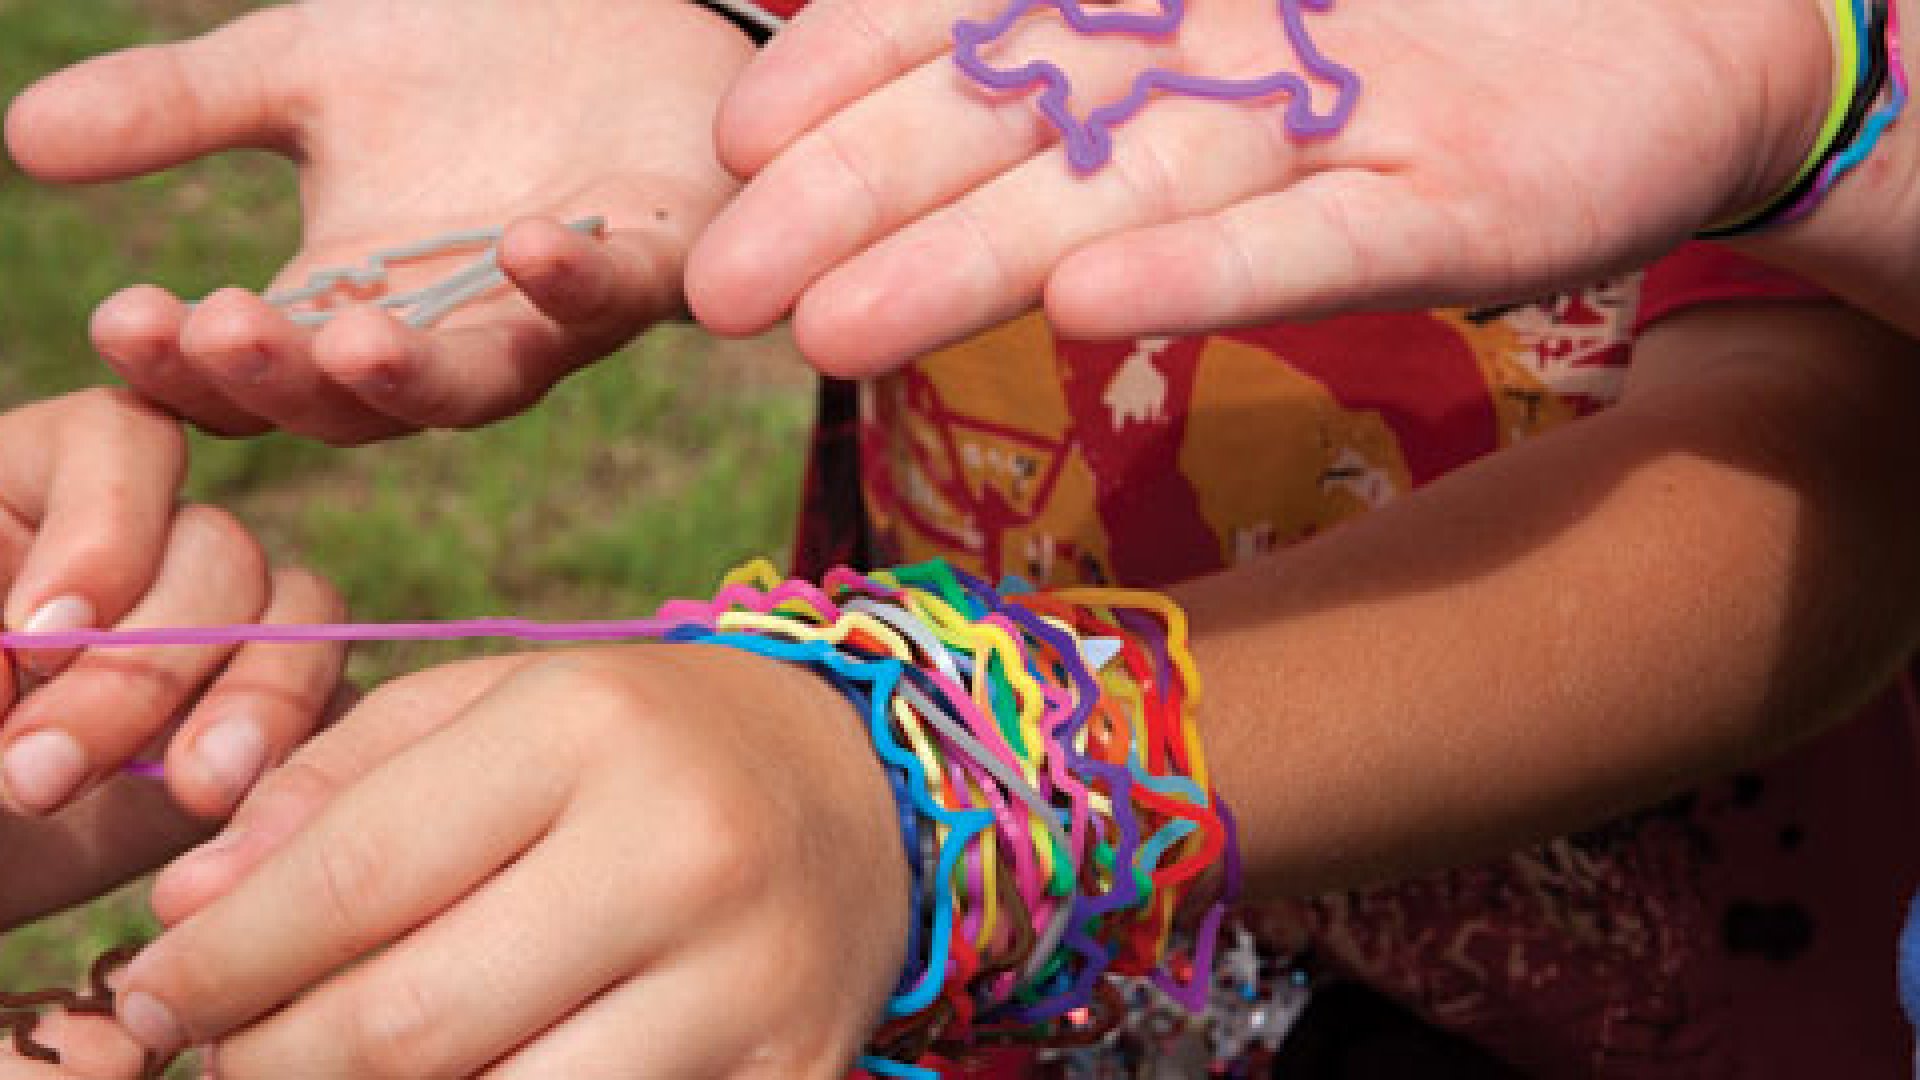 Things That Were Cool 10 Years Ago - Silly Bands; I loved those things so much, but God forbid I pay up to $10 for rubber bands in the shape of animals.